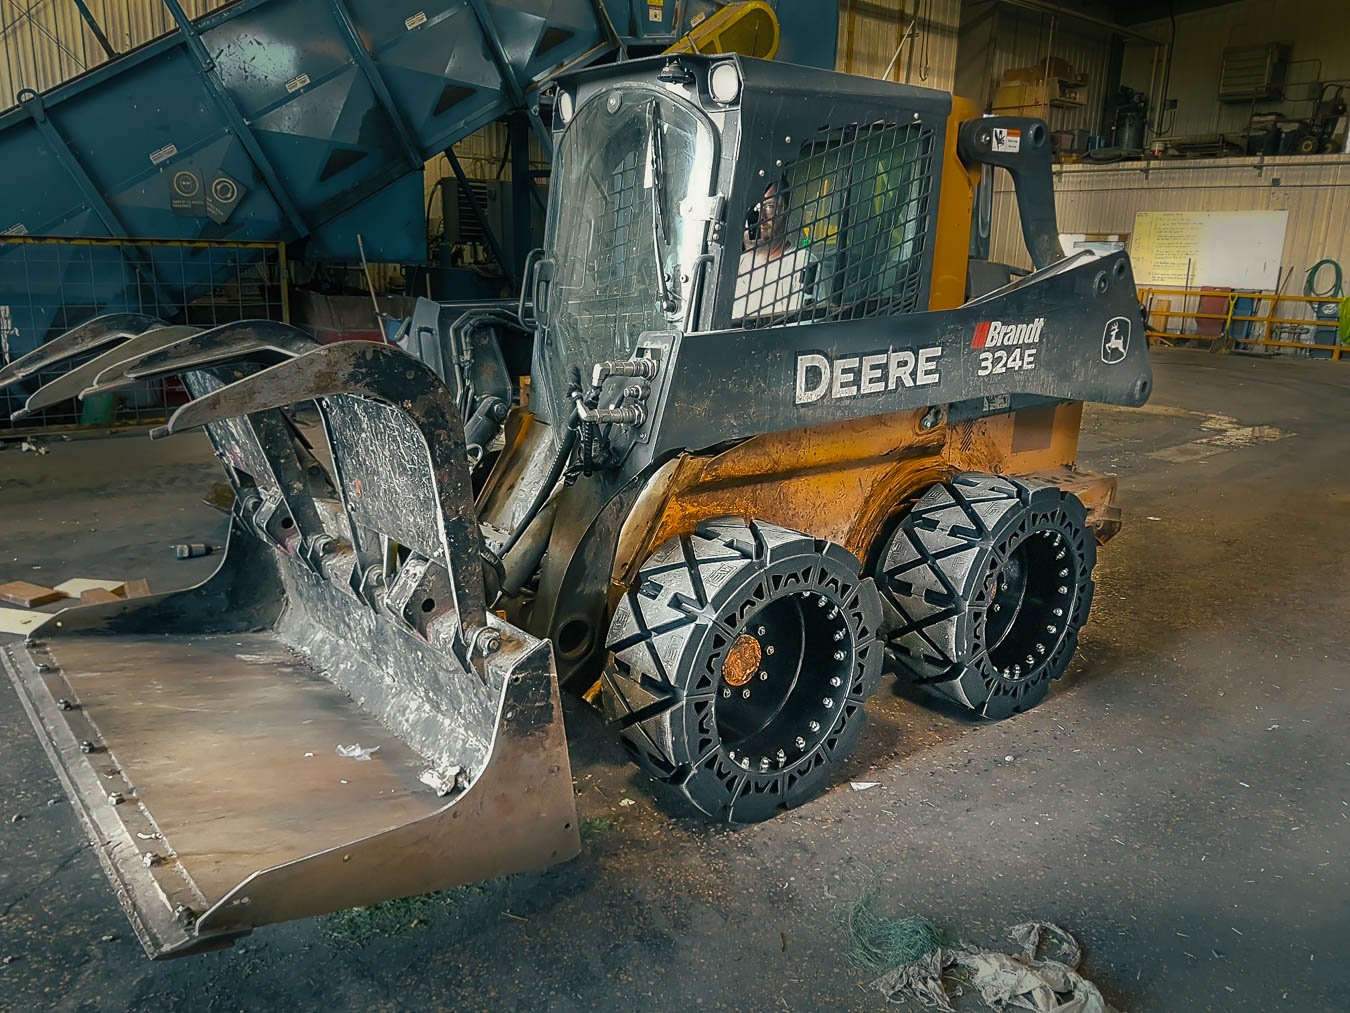 This image shows a DEERE 324E with our Airless Skid Steer Tires the EWRS-HS